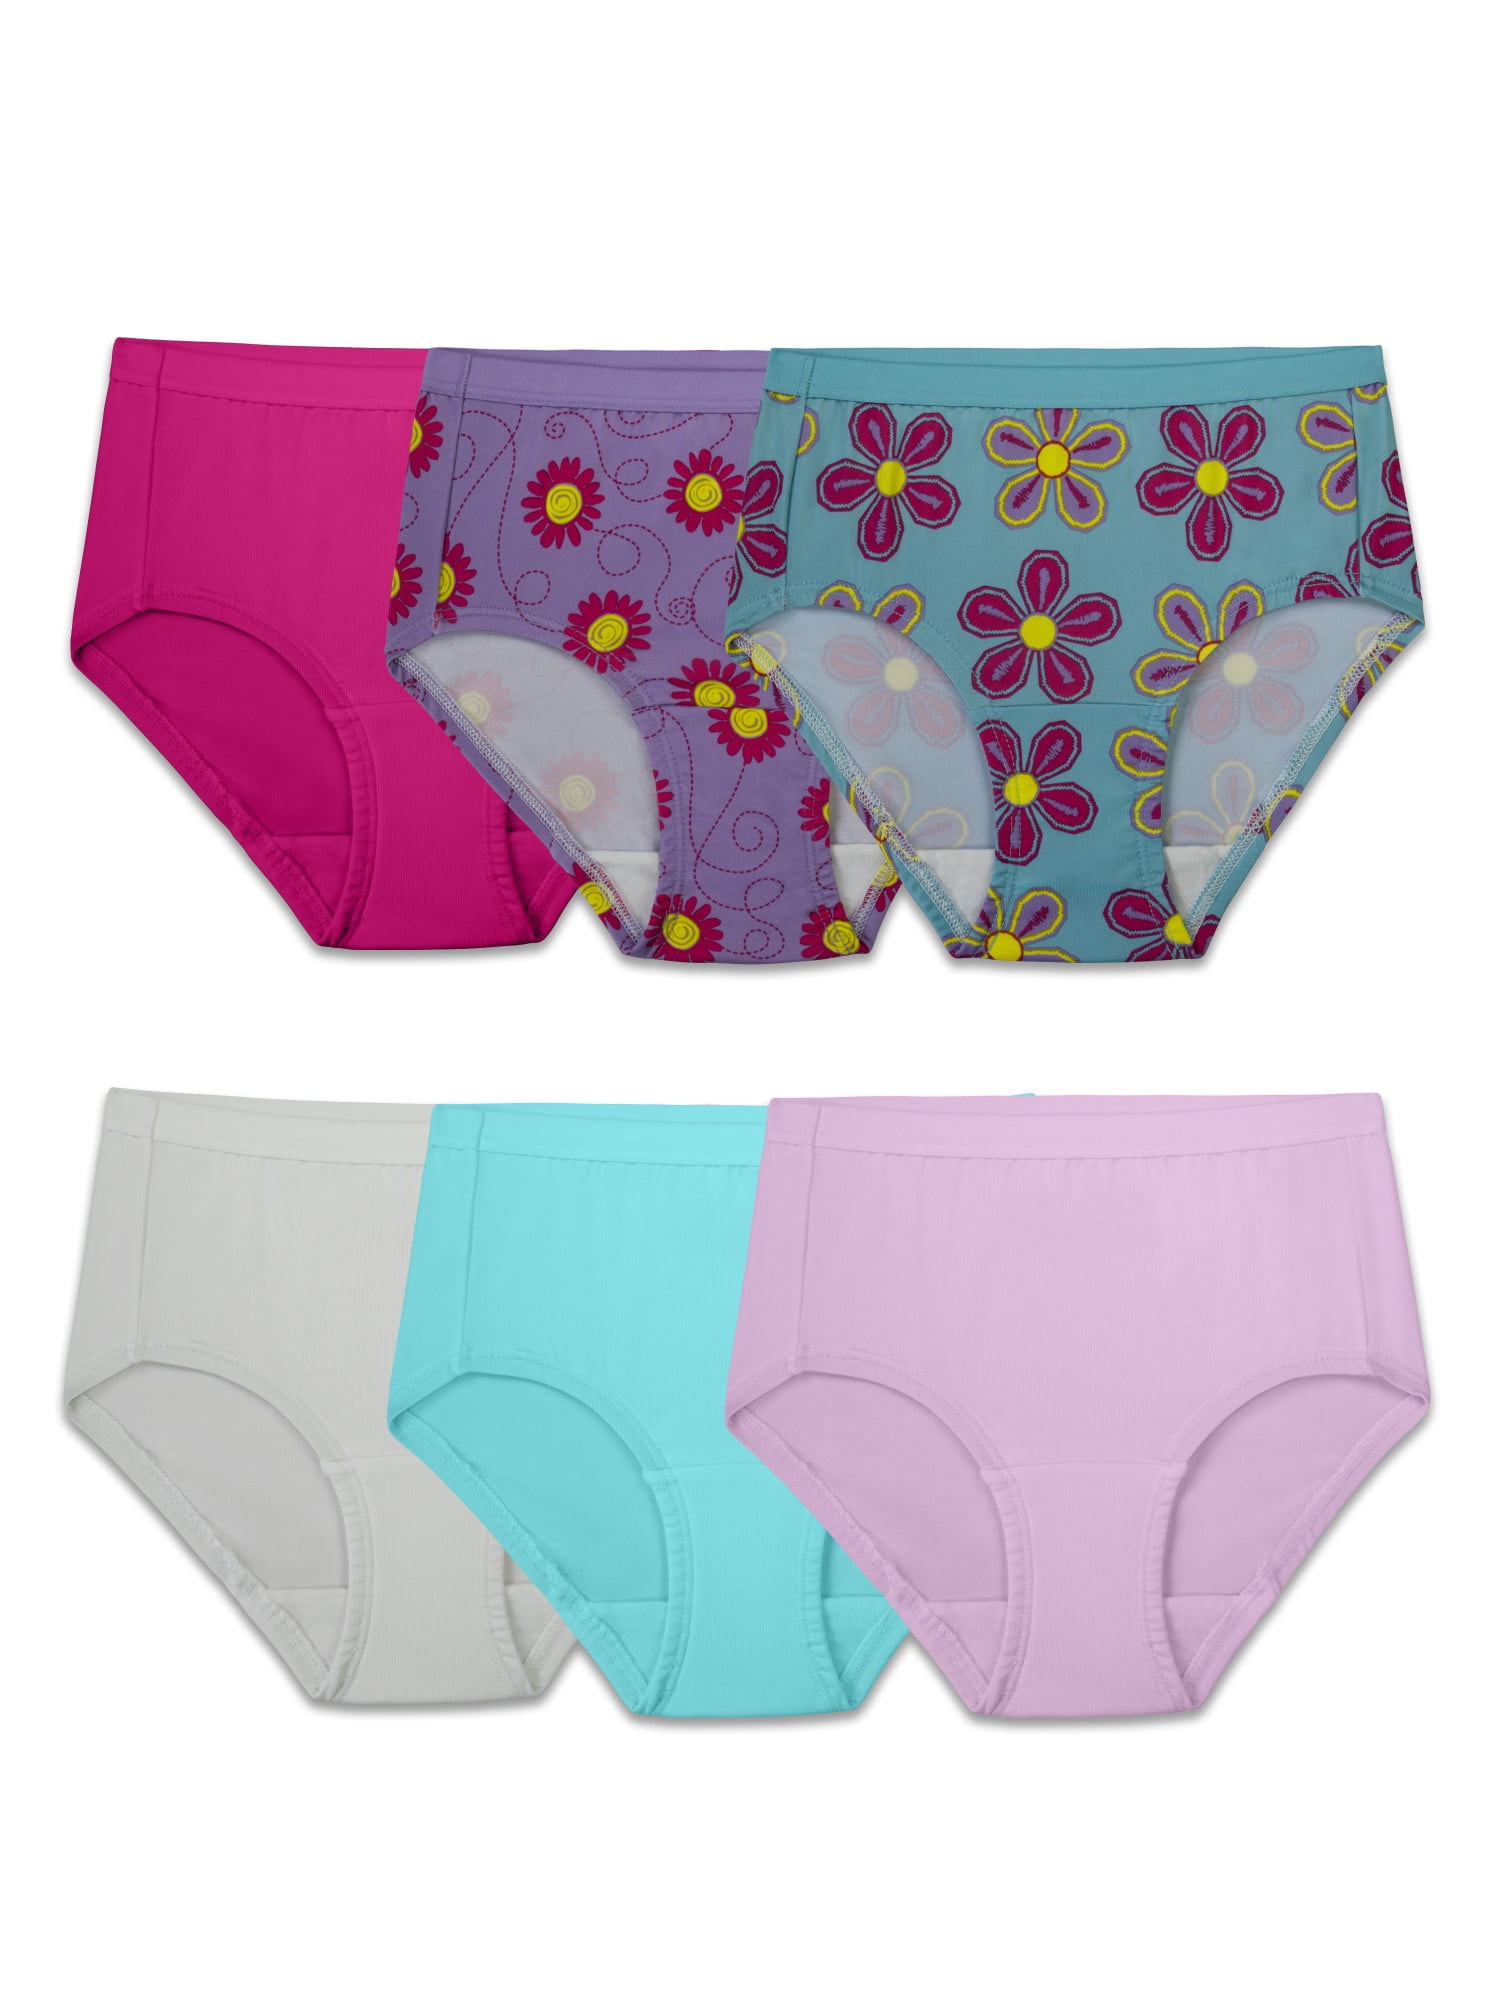 Fruit of the Loom Girls' Assorted Cotton Brief Underwear, 6 Pack